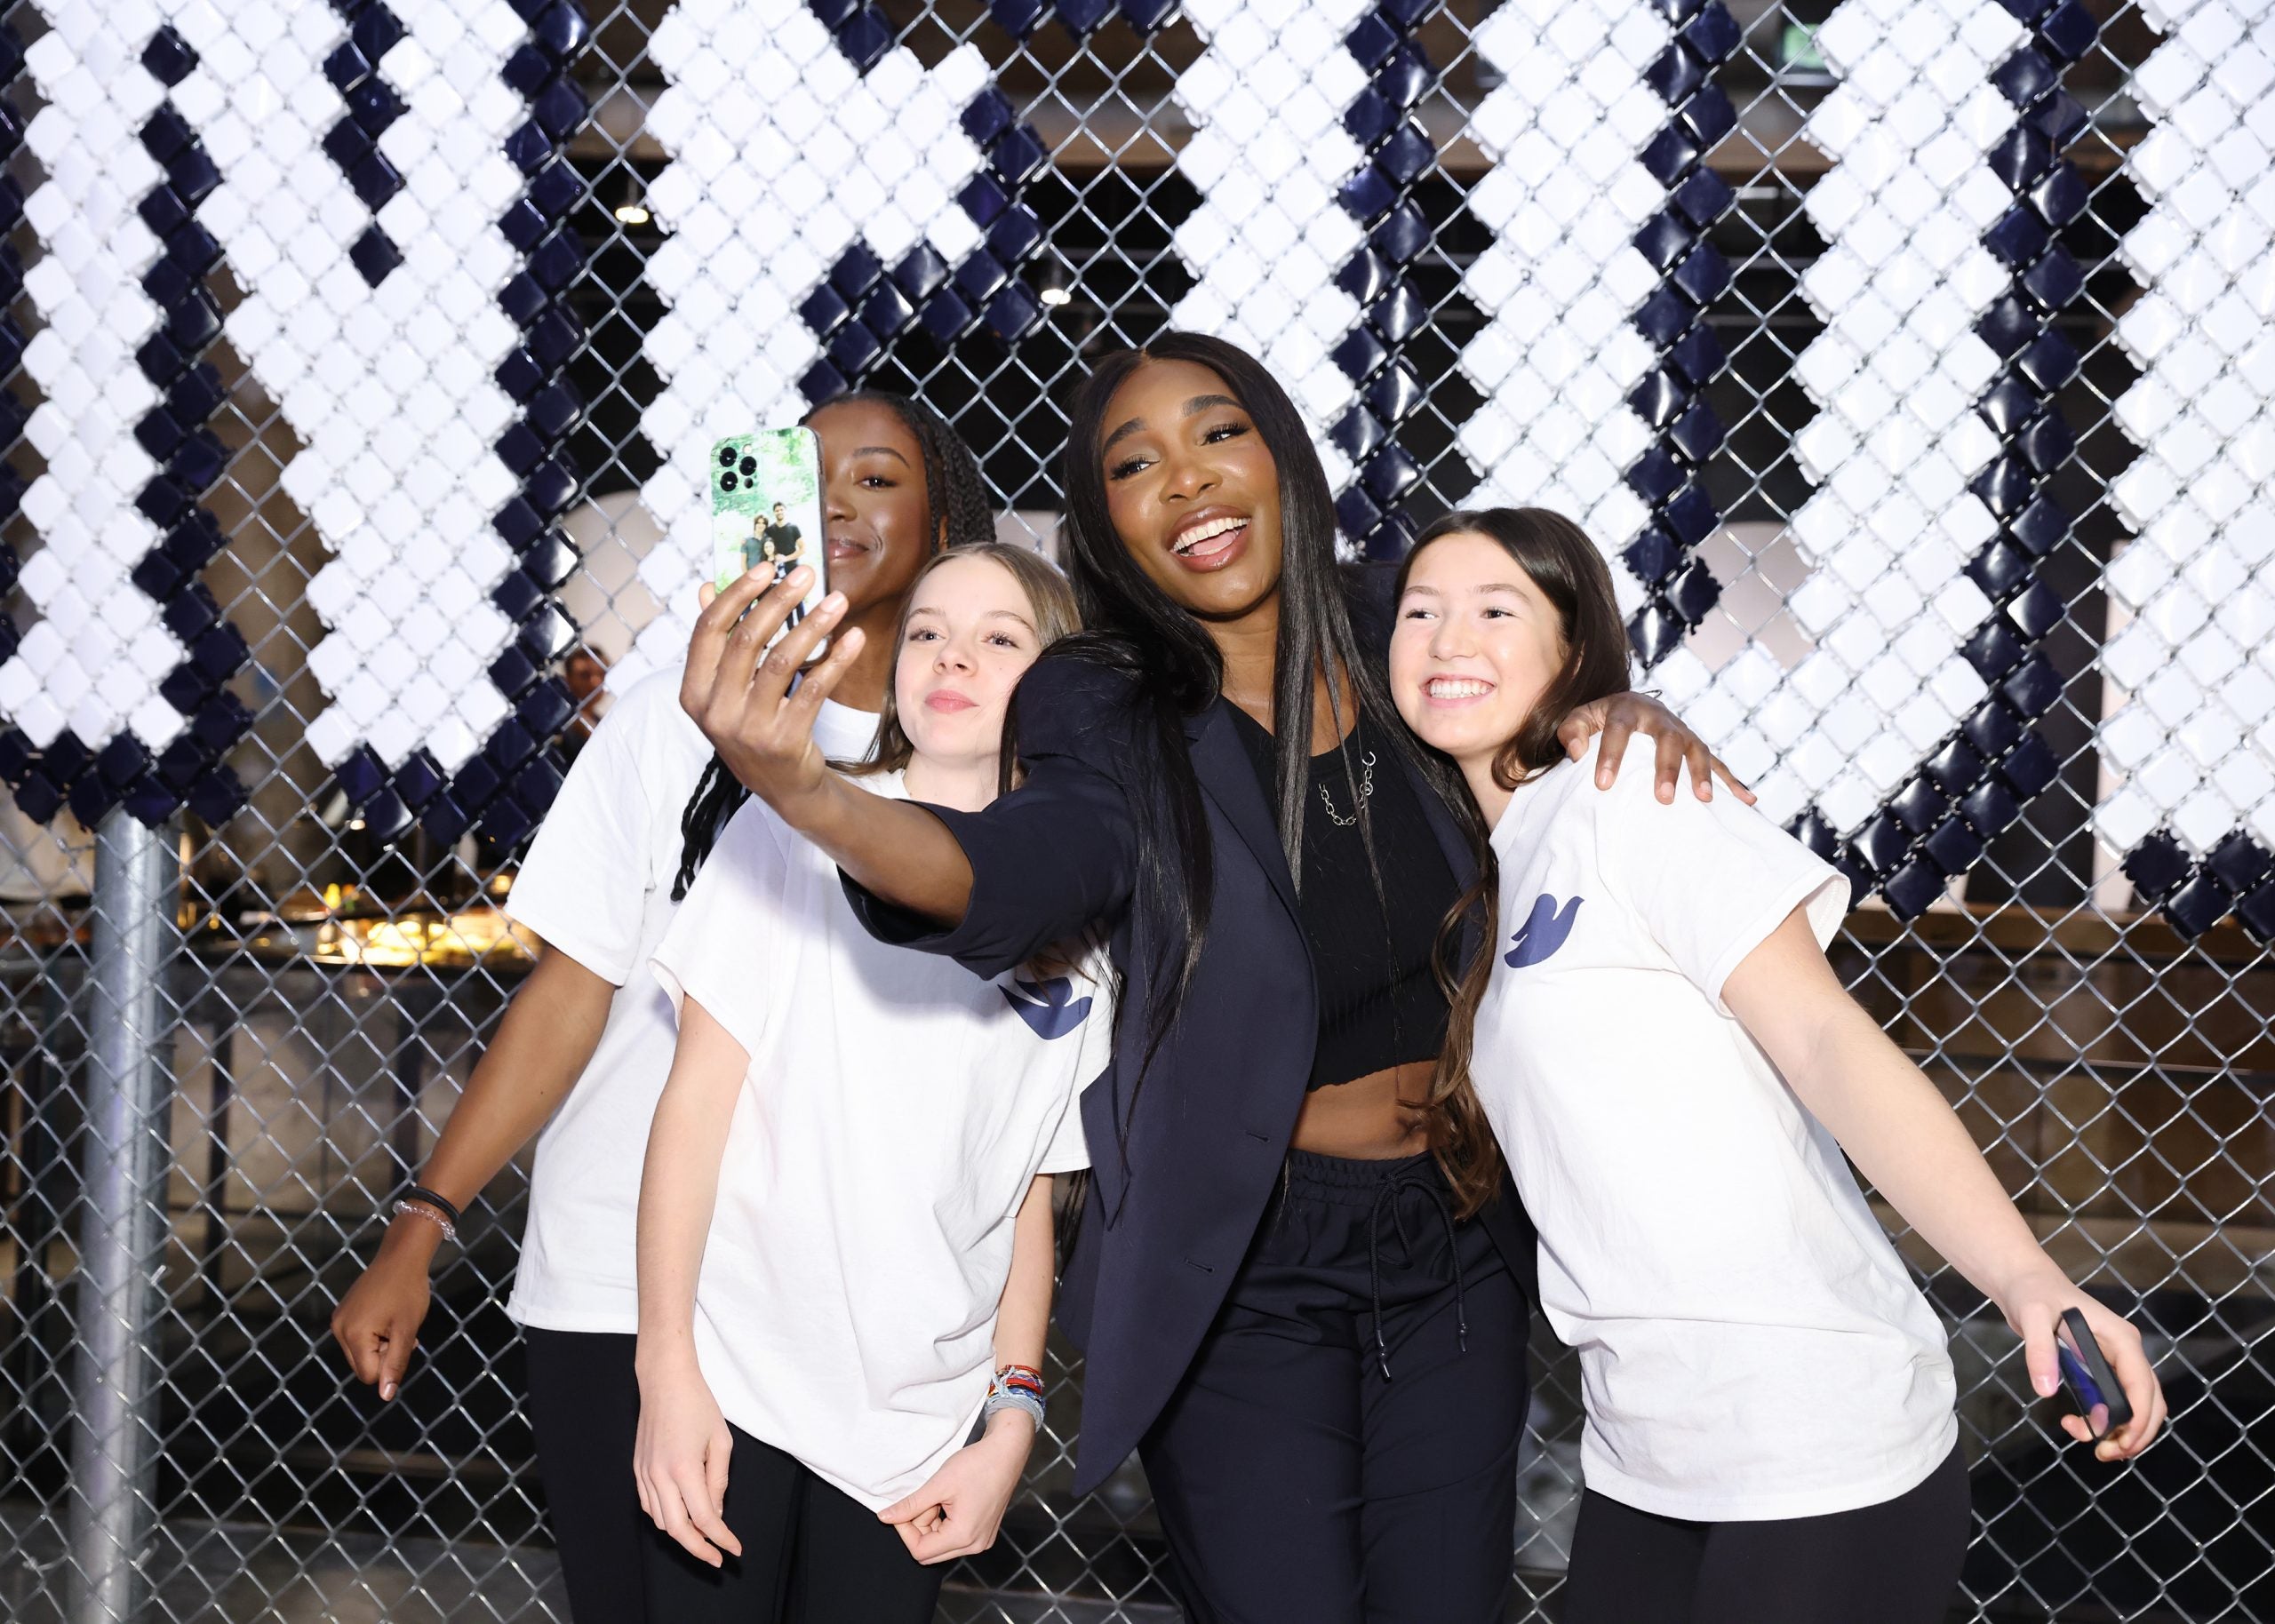 Venus Williams And Gymnast Laurie Hernandez Partner With Dove And Nike To Keep Young Girls In Sports